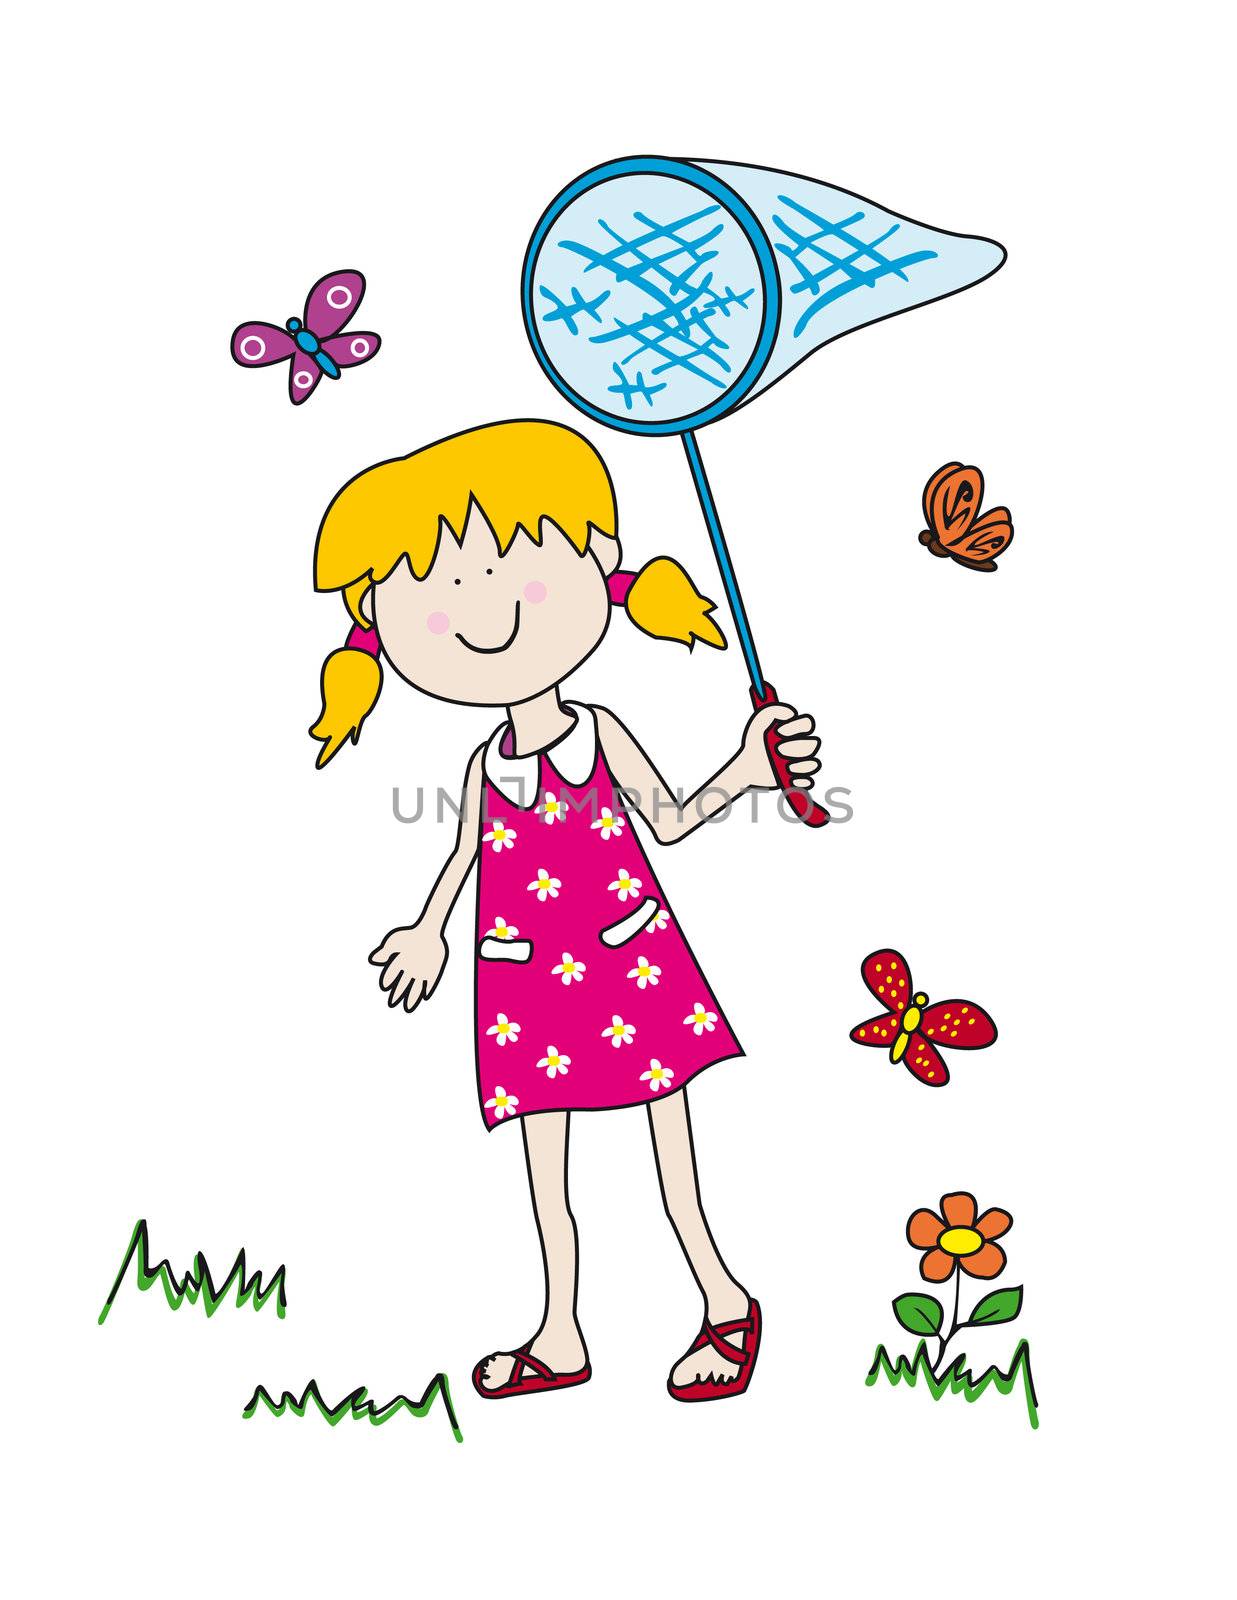 Large childlike cartoon character: little girl with a big smile holding a butterfly net and having fun tryong to catch them